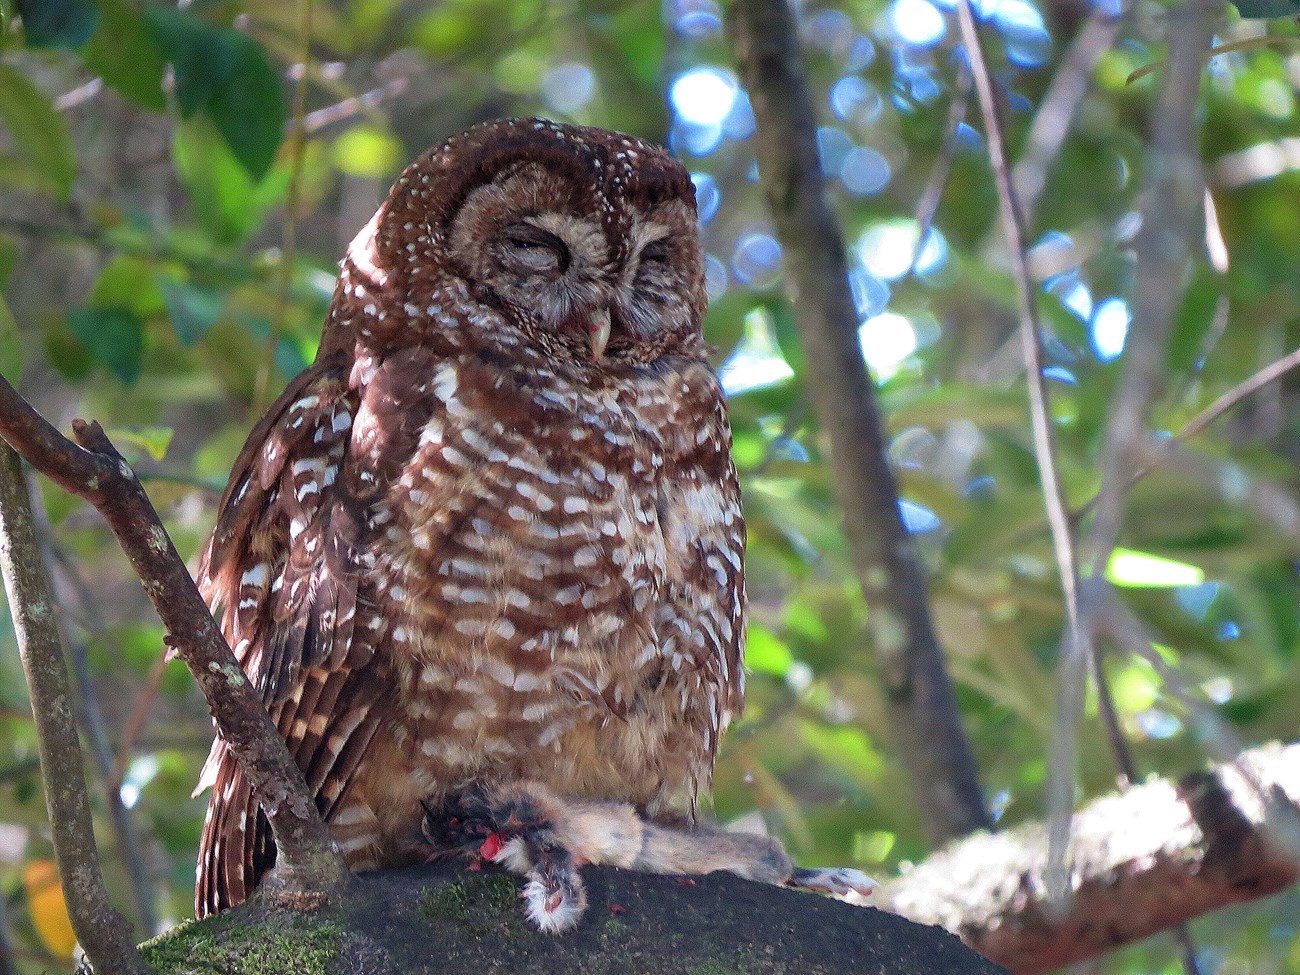 A brown owl with striking markings sits on a tree branch in a forest with a furry animal in its talons